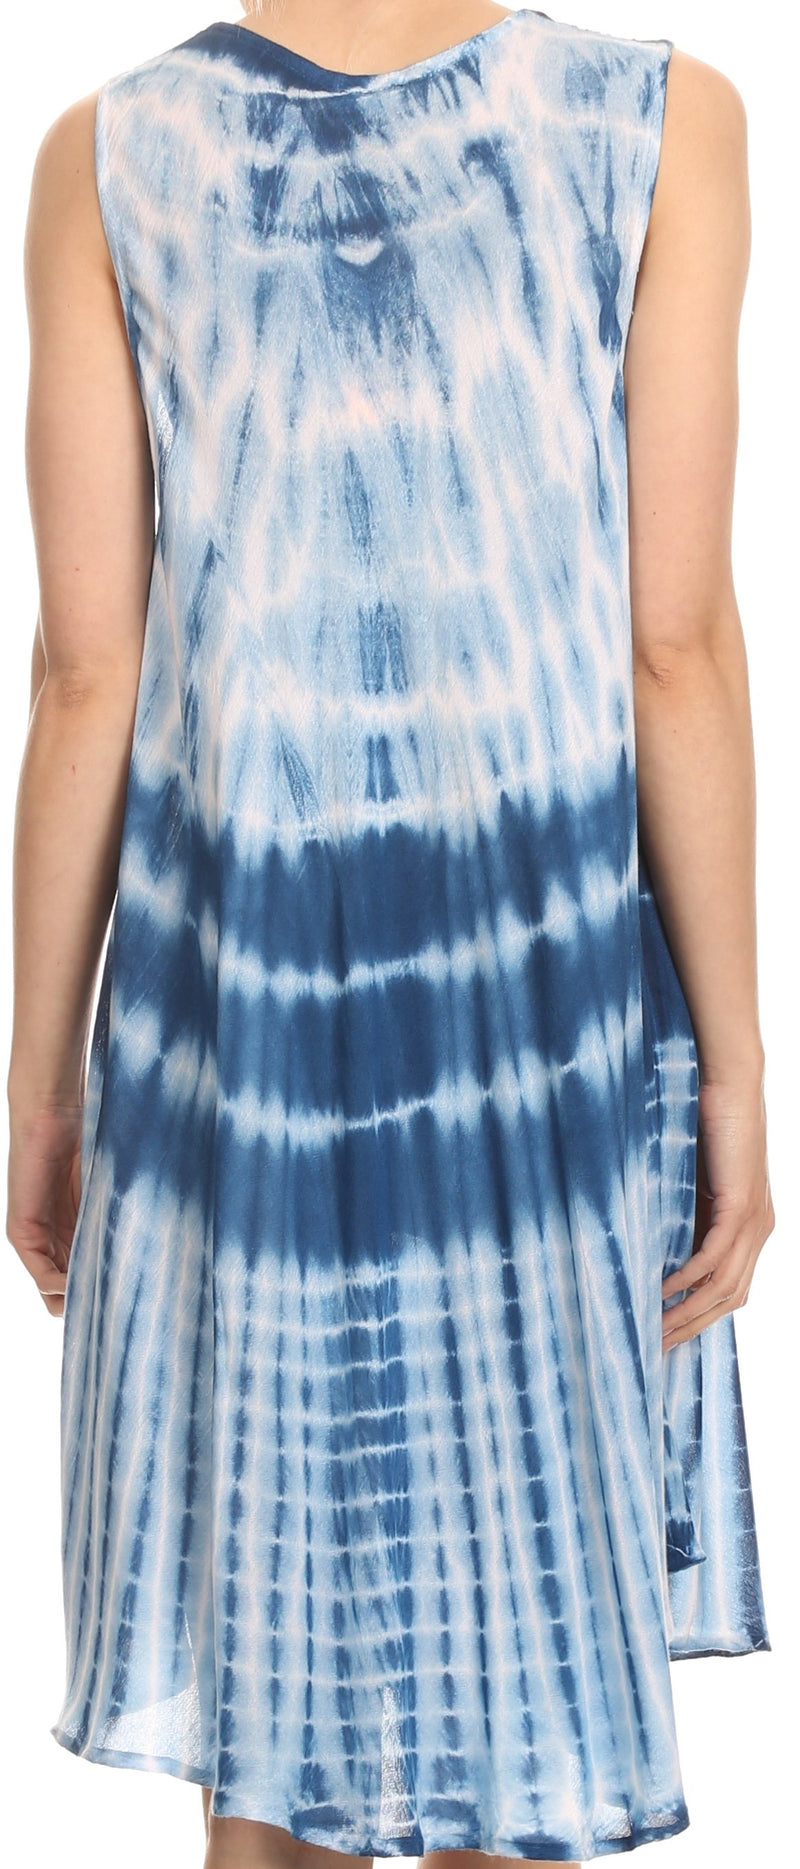 Sakkas Frankie Two Tone Tie Dyed Tank Dress / Cover Up With Embroidery Neckline